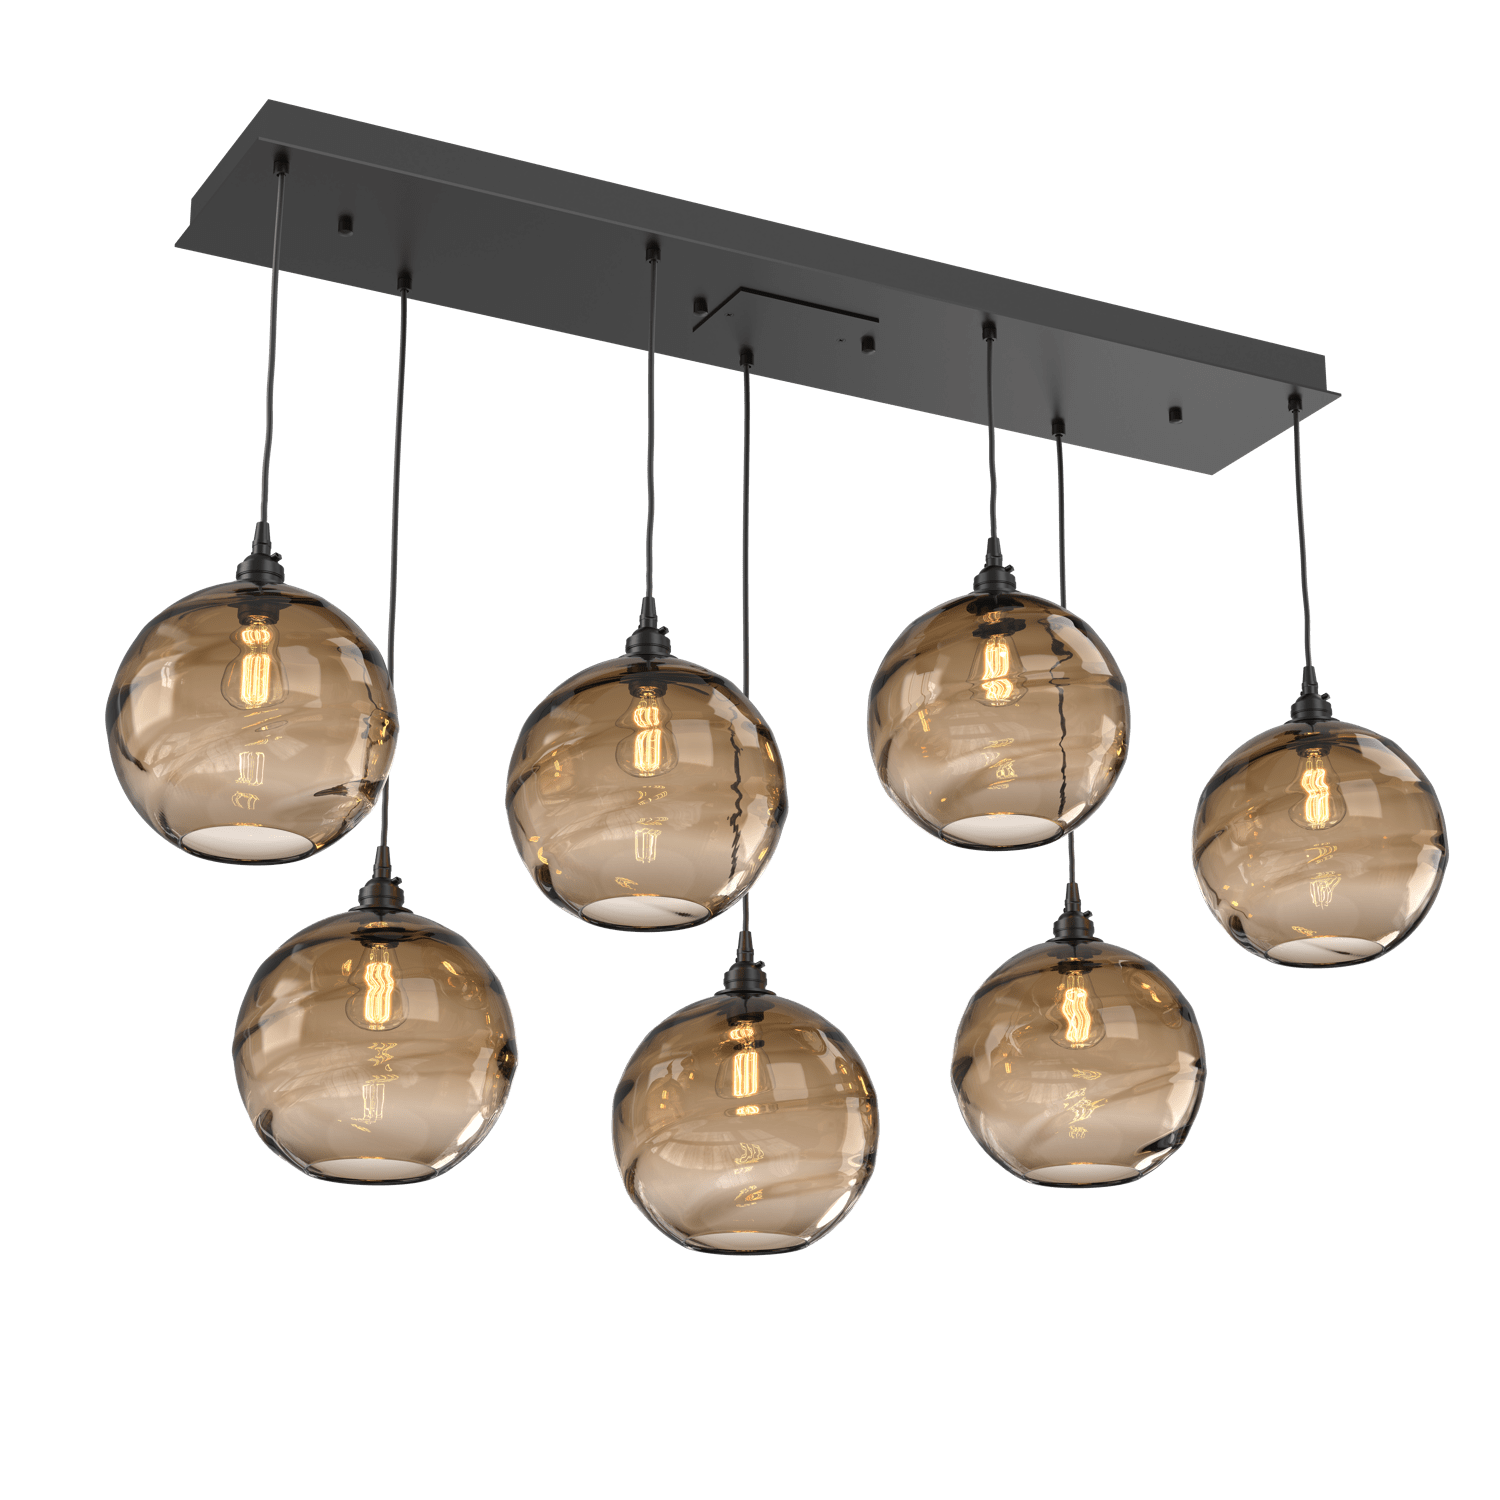 PLB0047-07-MB-OB-Hammerton-Studio-Optic-Blown-Glass-Terra-7-light-linear-pendant-chandelier-with-matte-black-finish-and-optic-bronze-blown-glass-shades-and-incandescent-lamping